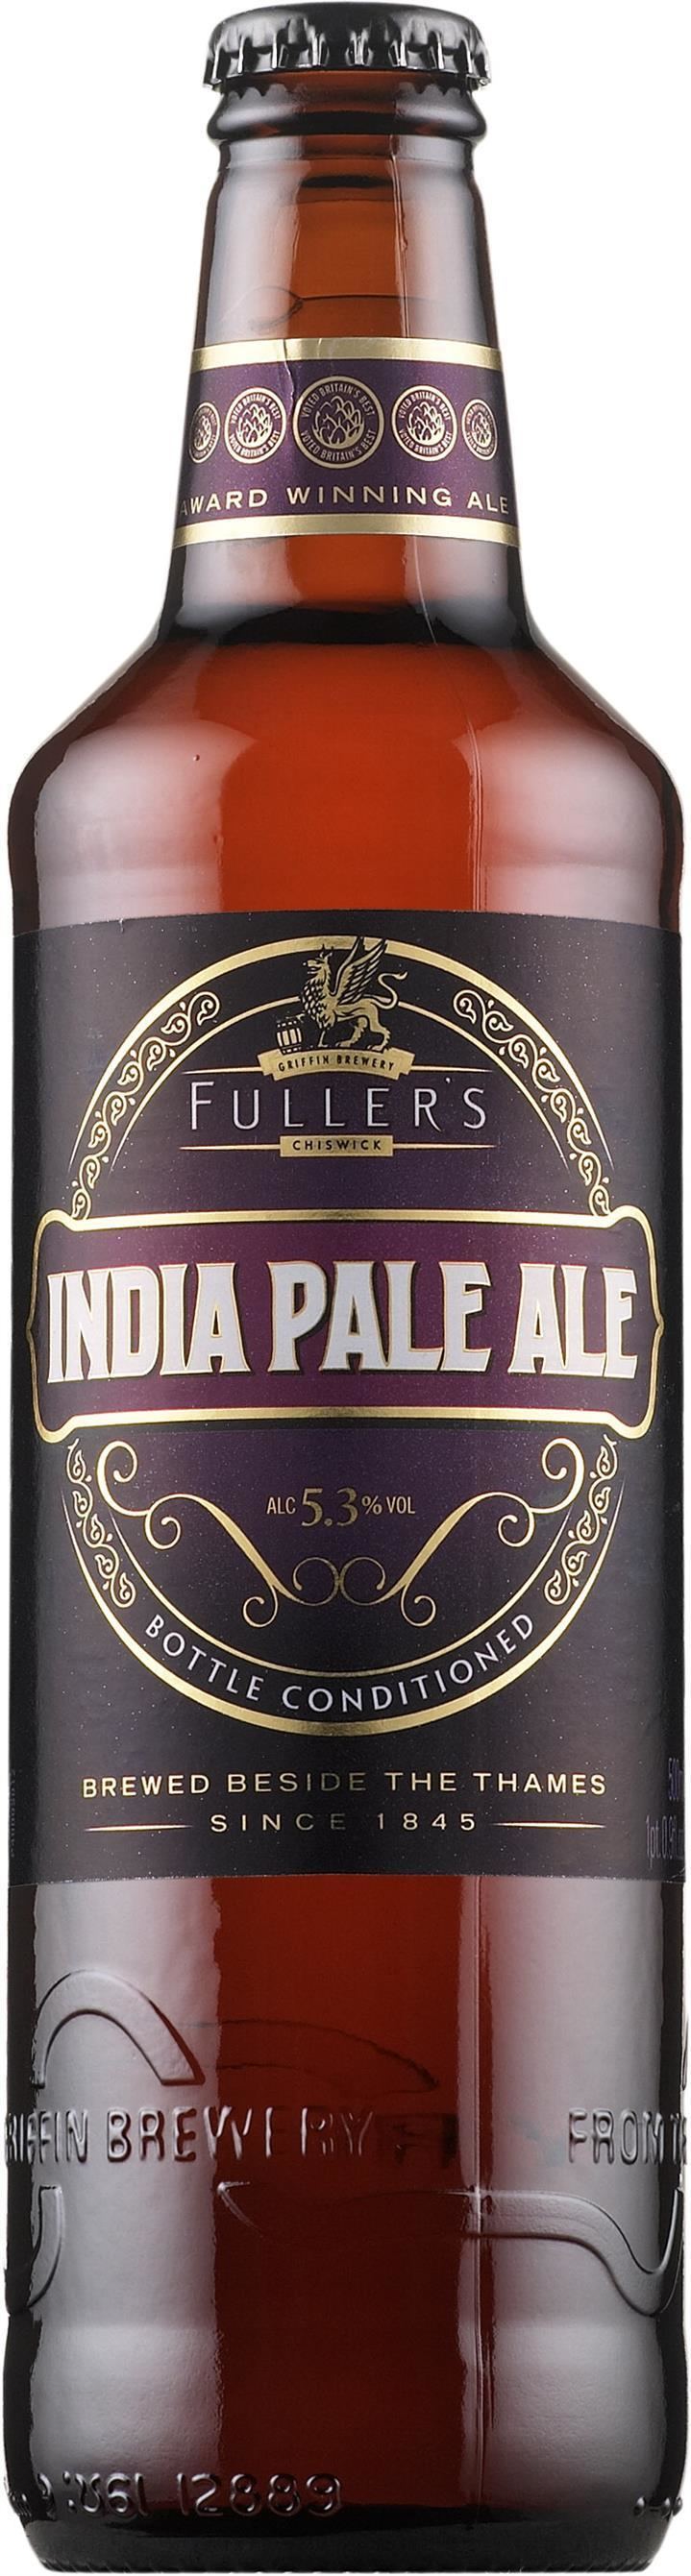 India pale ale Fuller39s India Pale Ale Beer Alko